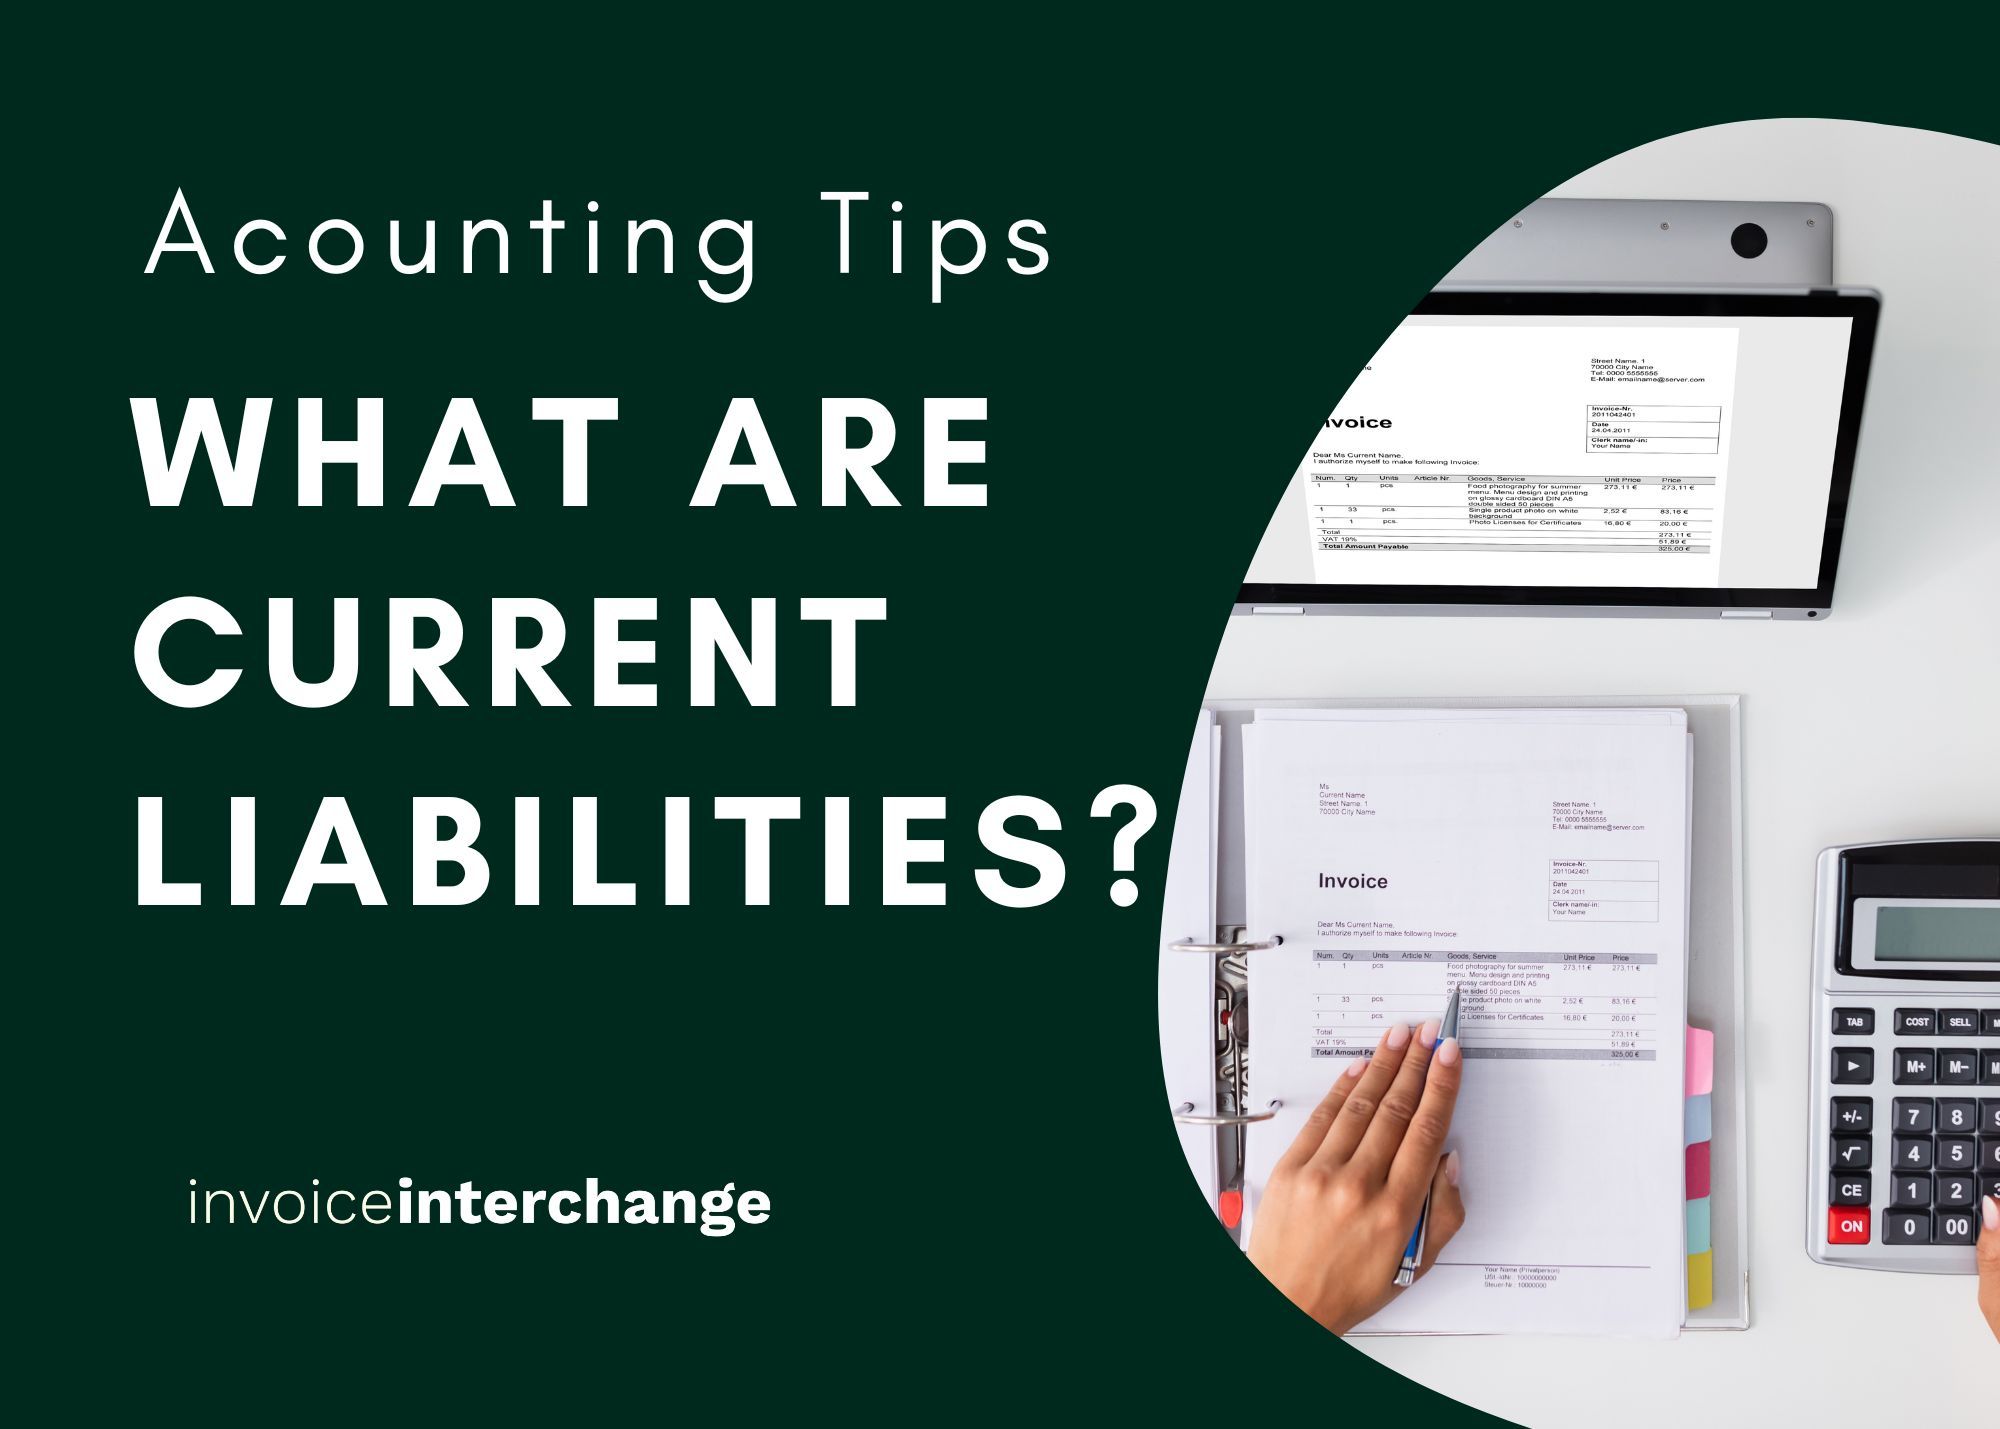 Accounting Tips - What are Current Liabilities?